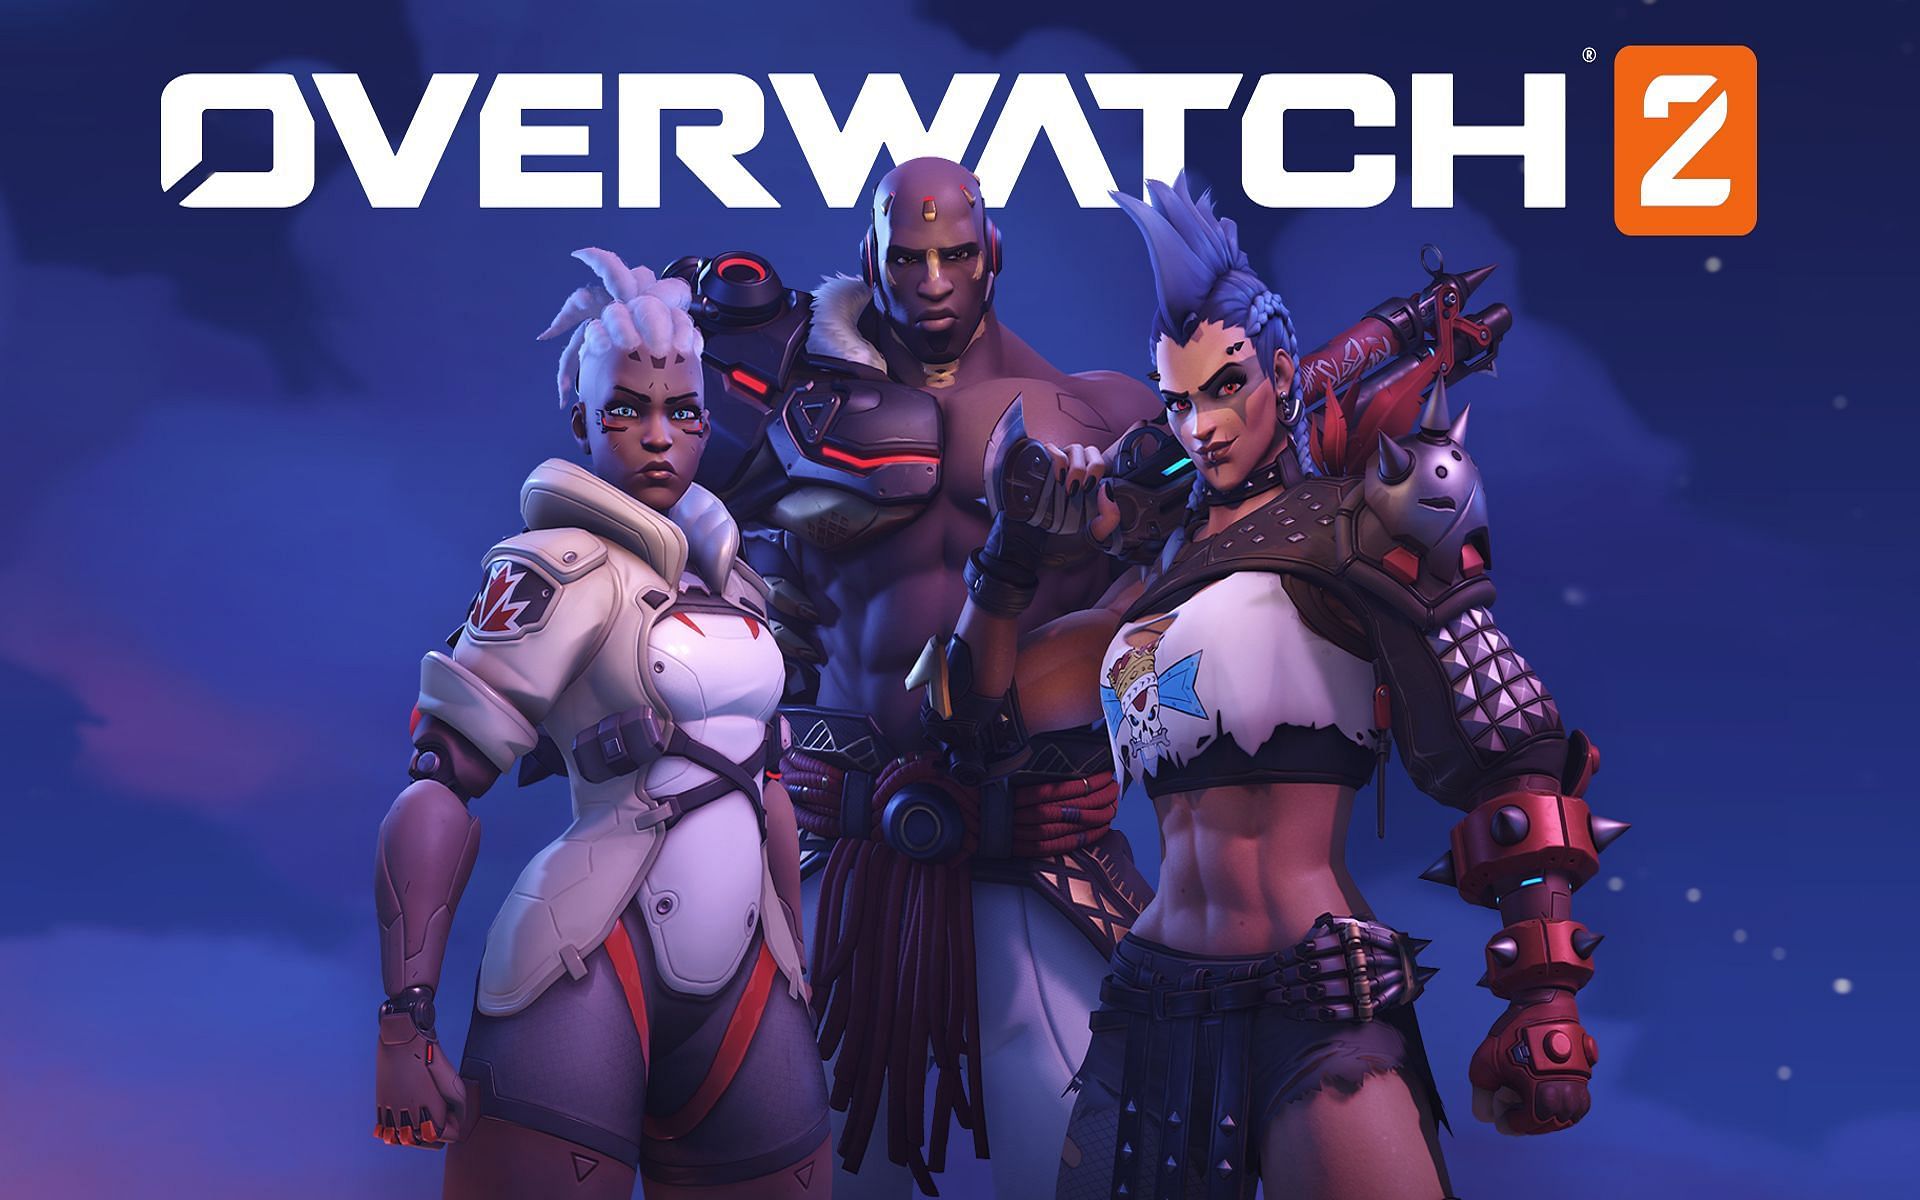 Guide to download Overwatch 2 on PC (Image via Blizzard)